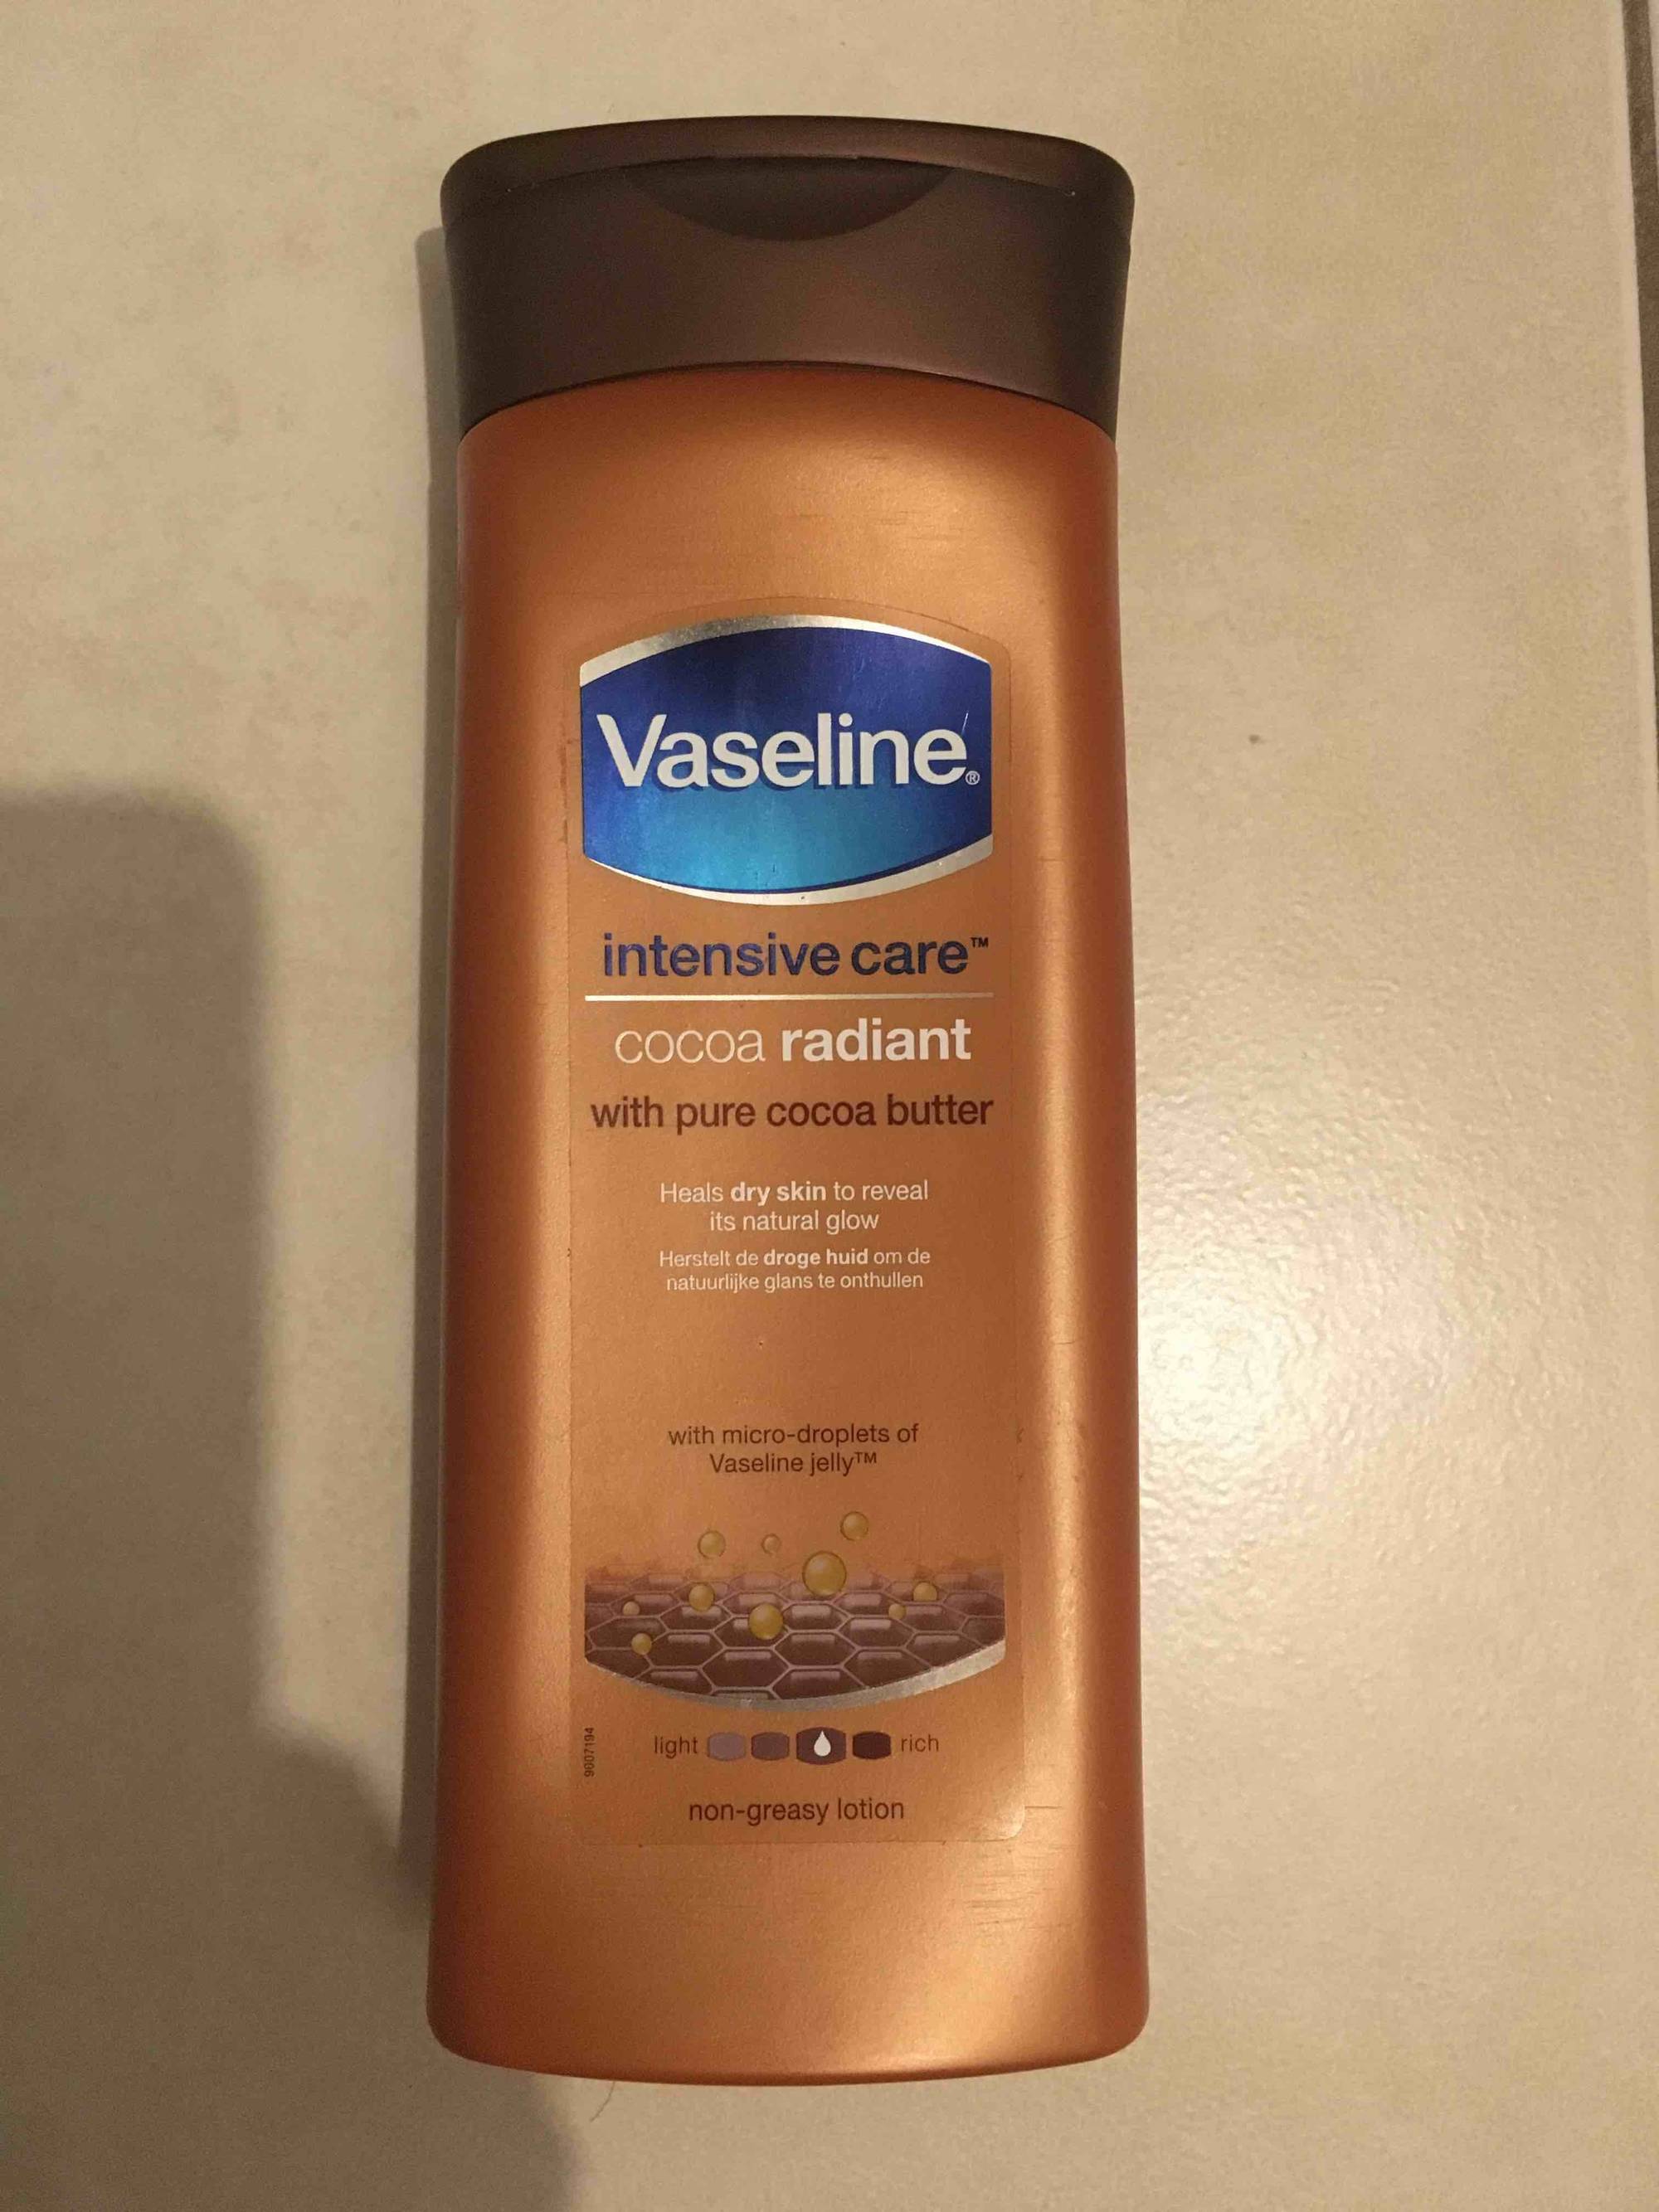 VASELINE - Intensive care with pure cocoa butter